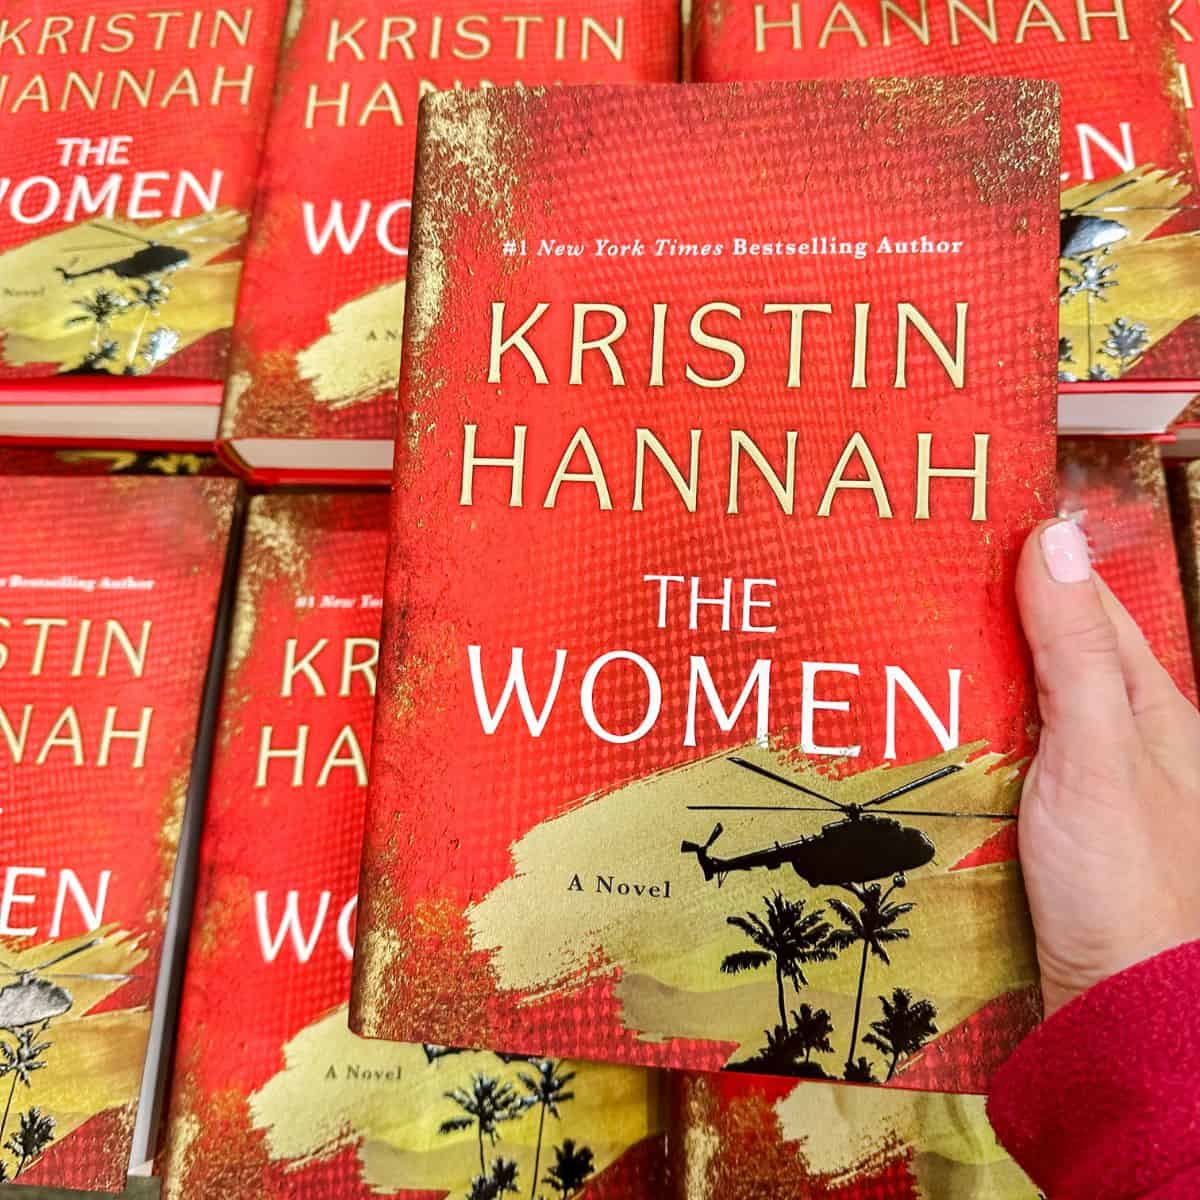 Copies of the women by Kristin Hannah.